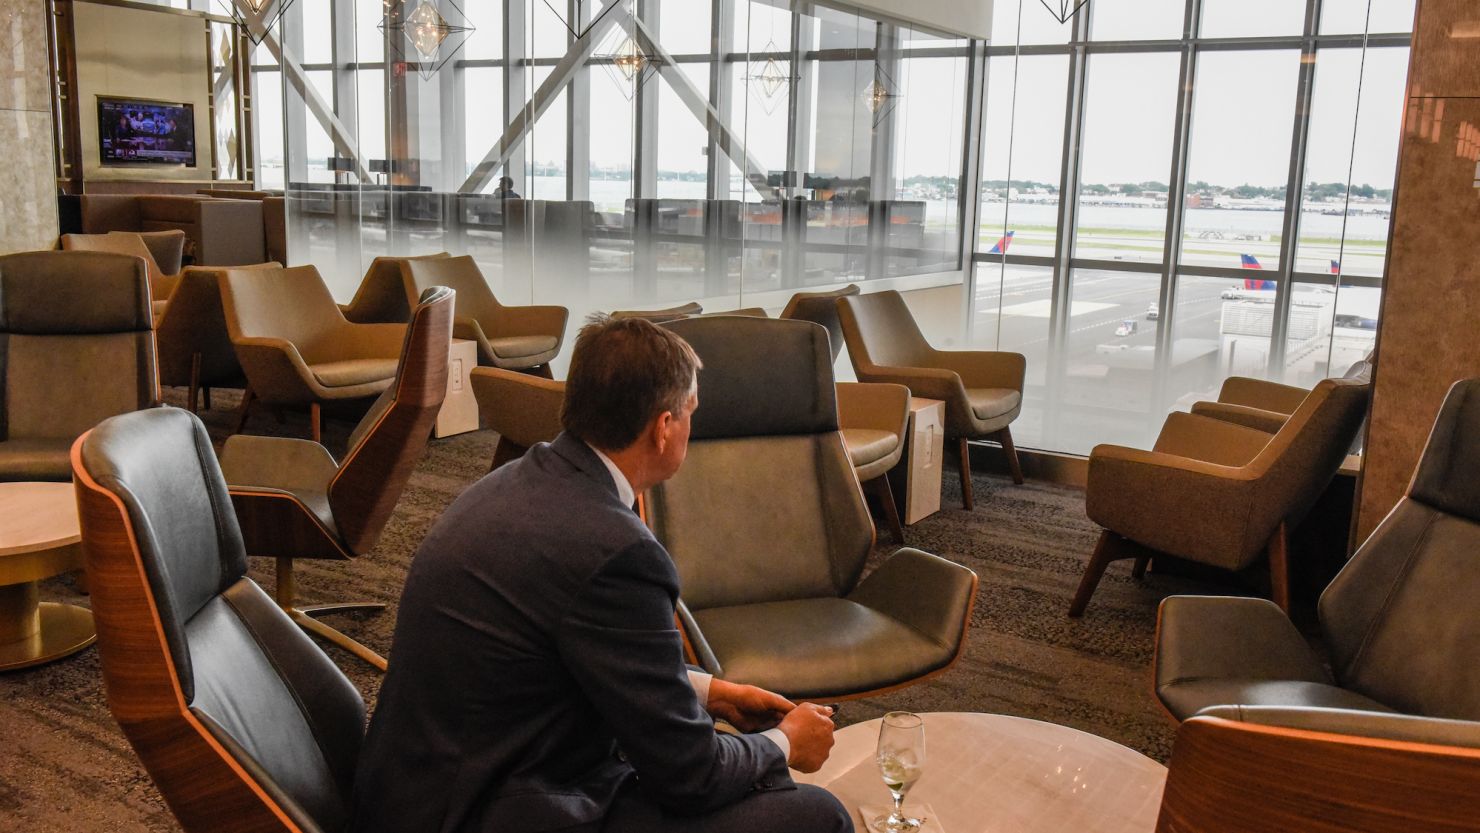 Airport lounges are just a few of the many perks promised for consumers who use airline reward cards, along with upgrades, frequent flyer miles and points to book travel, buy merchandise or even fund a college savings plan.